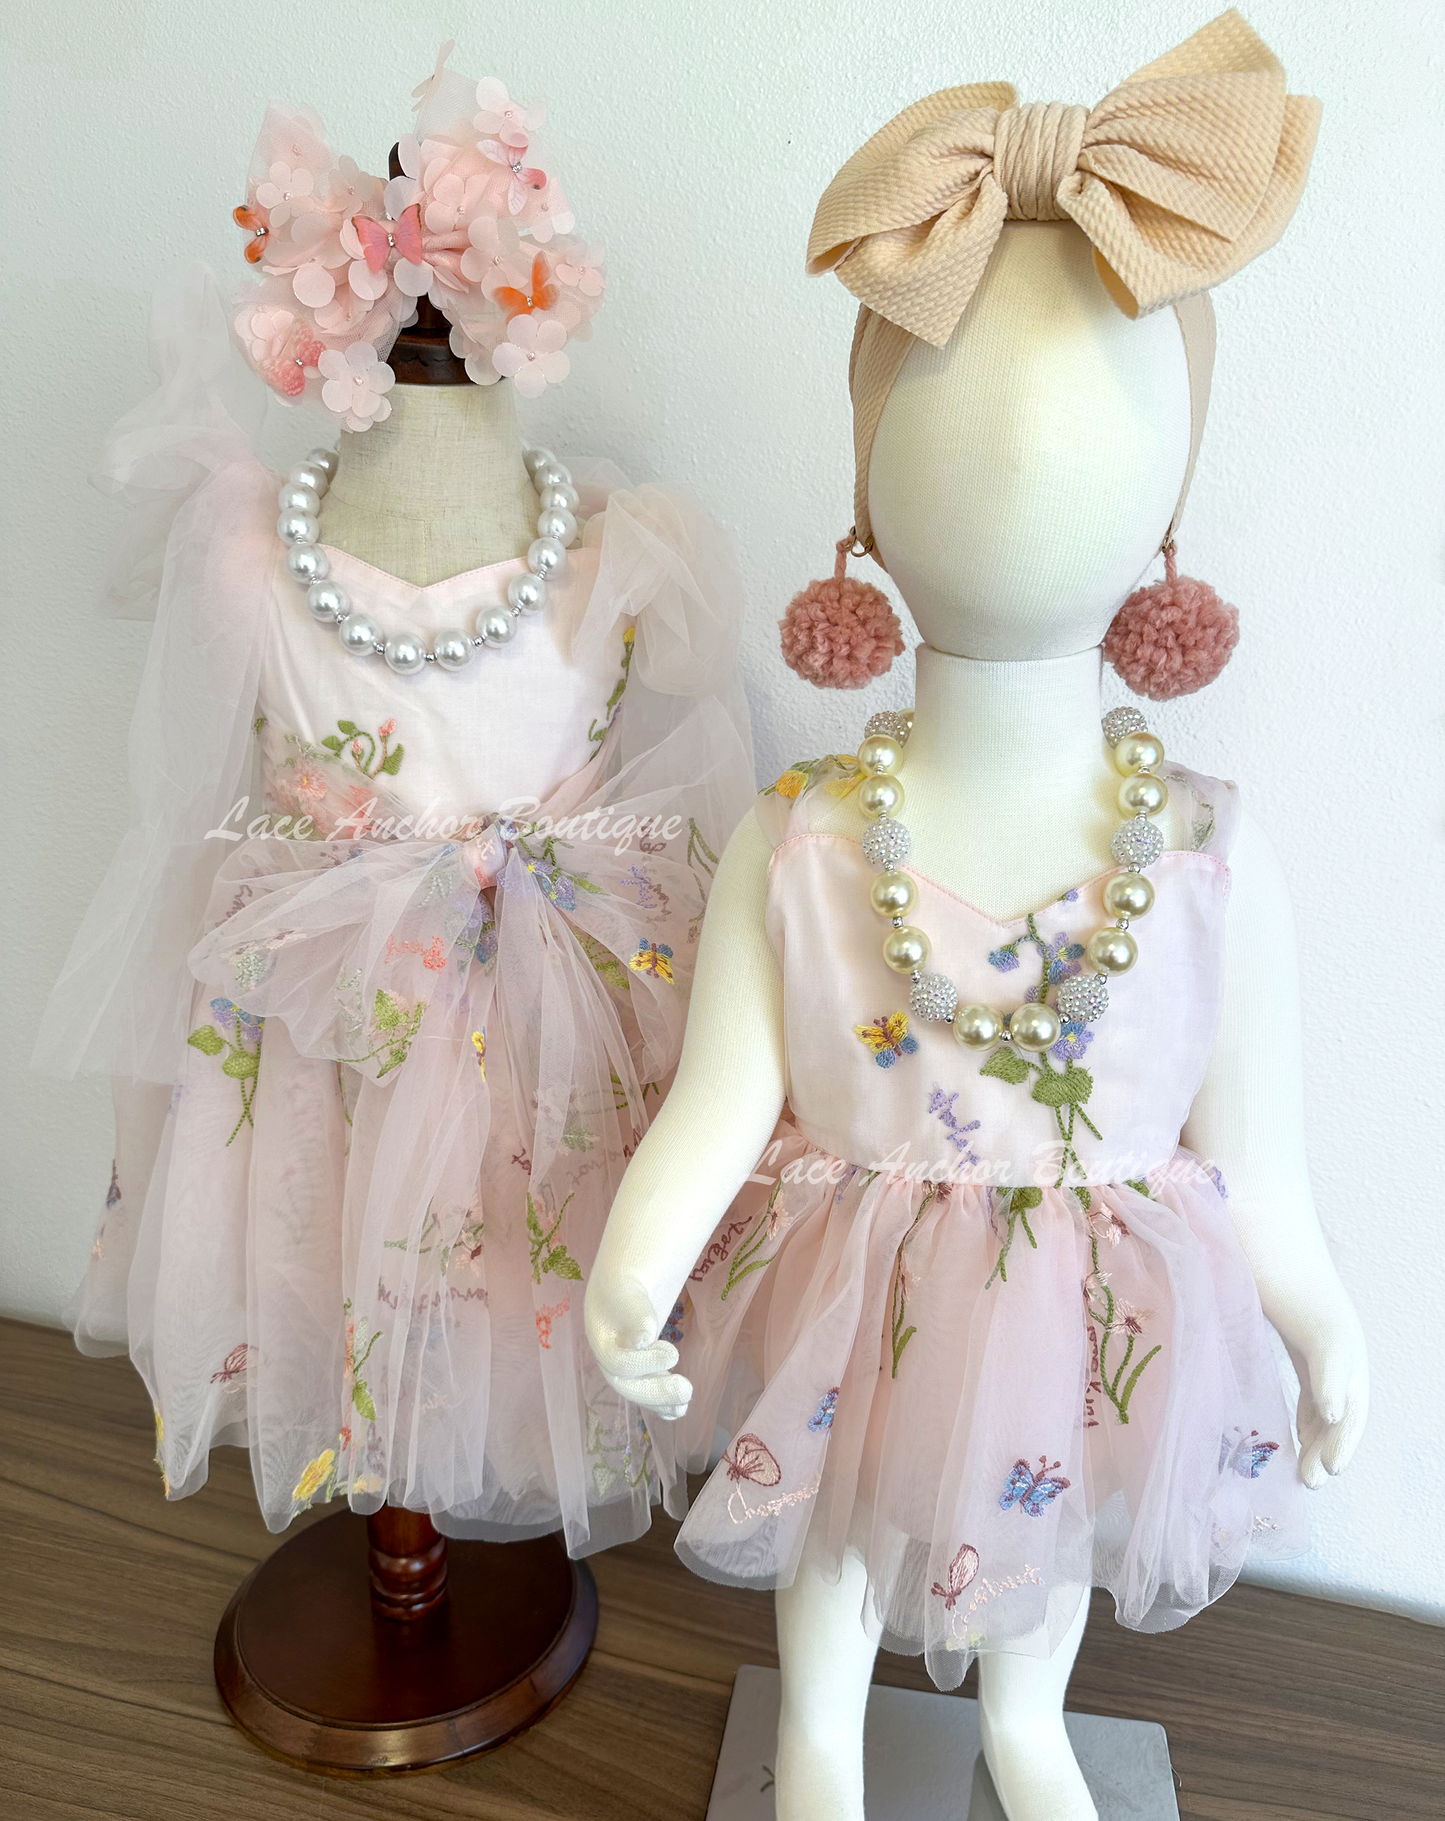 toddler youth puffy tied shoulder flower girl dress with large tied bow tied at waist. Baby girls romper with tied back fluffy bow. Outfits in light blush pink with embroidered floral print.